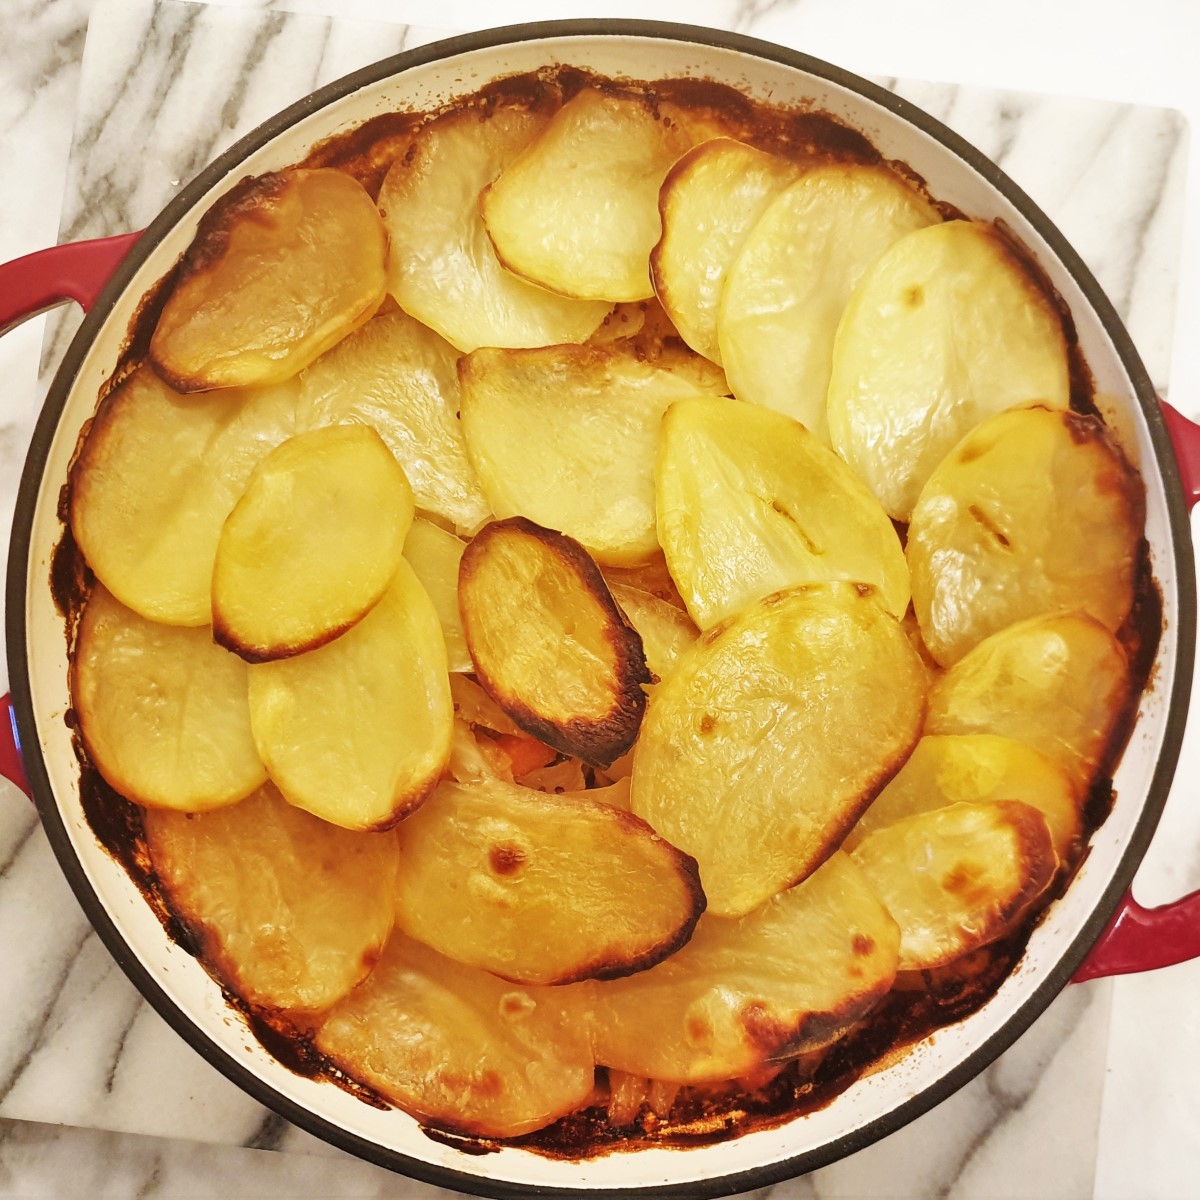 Pork and cabbage hotpot covered with a layer of crispy potatoes.